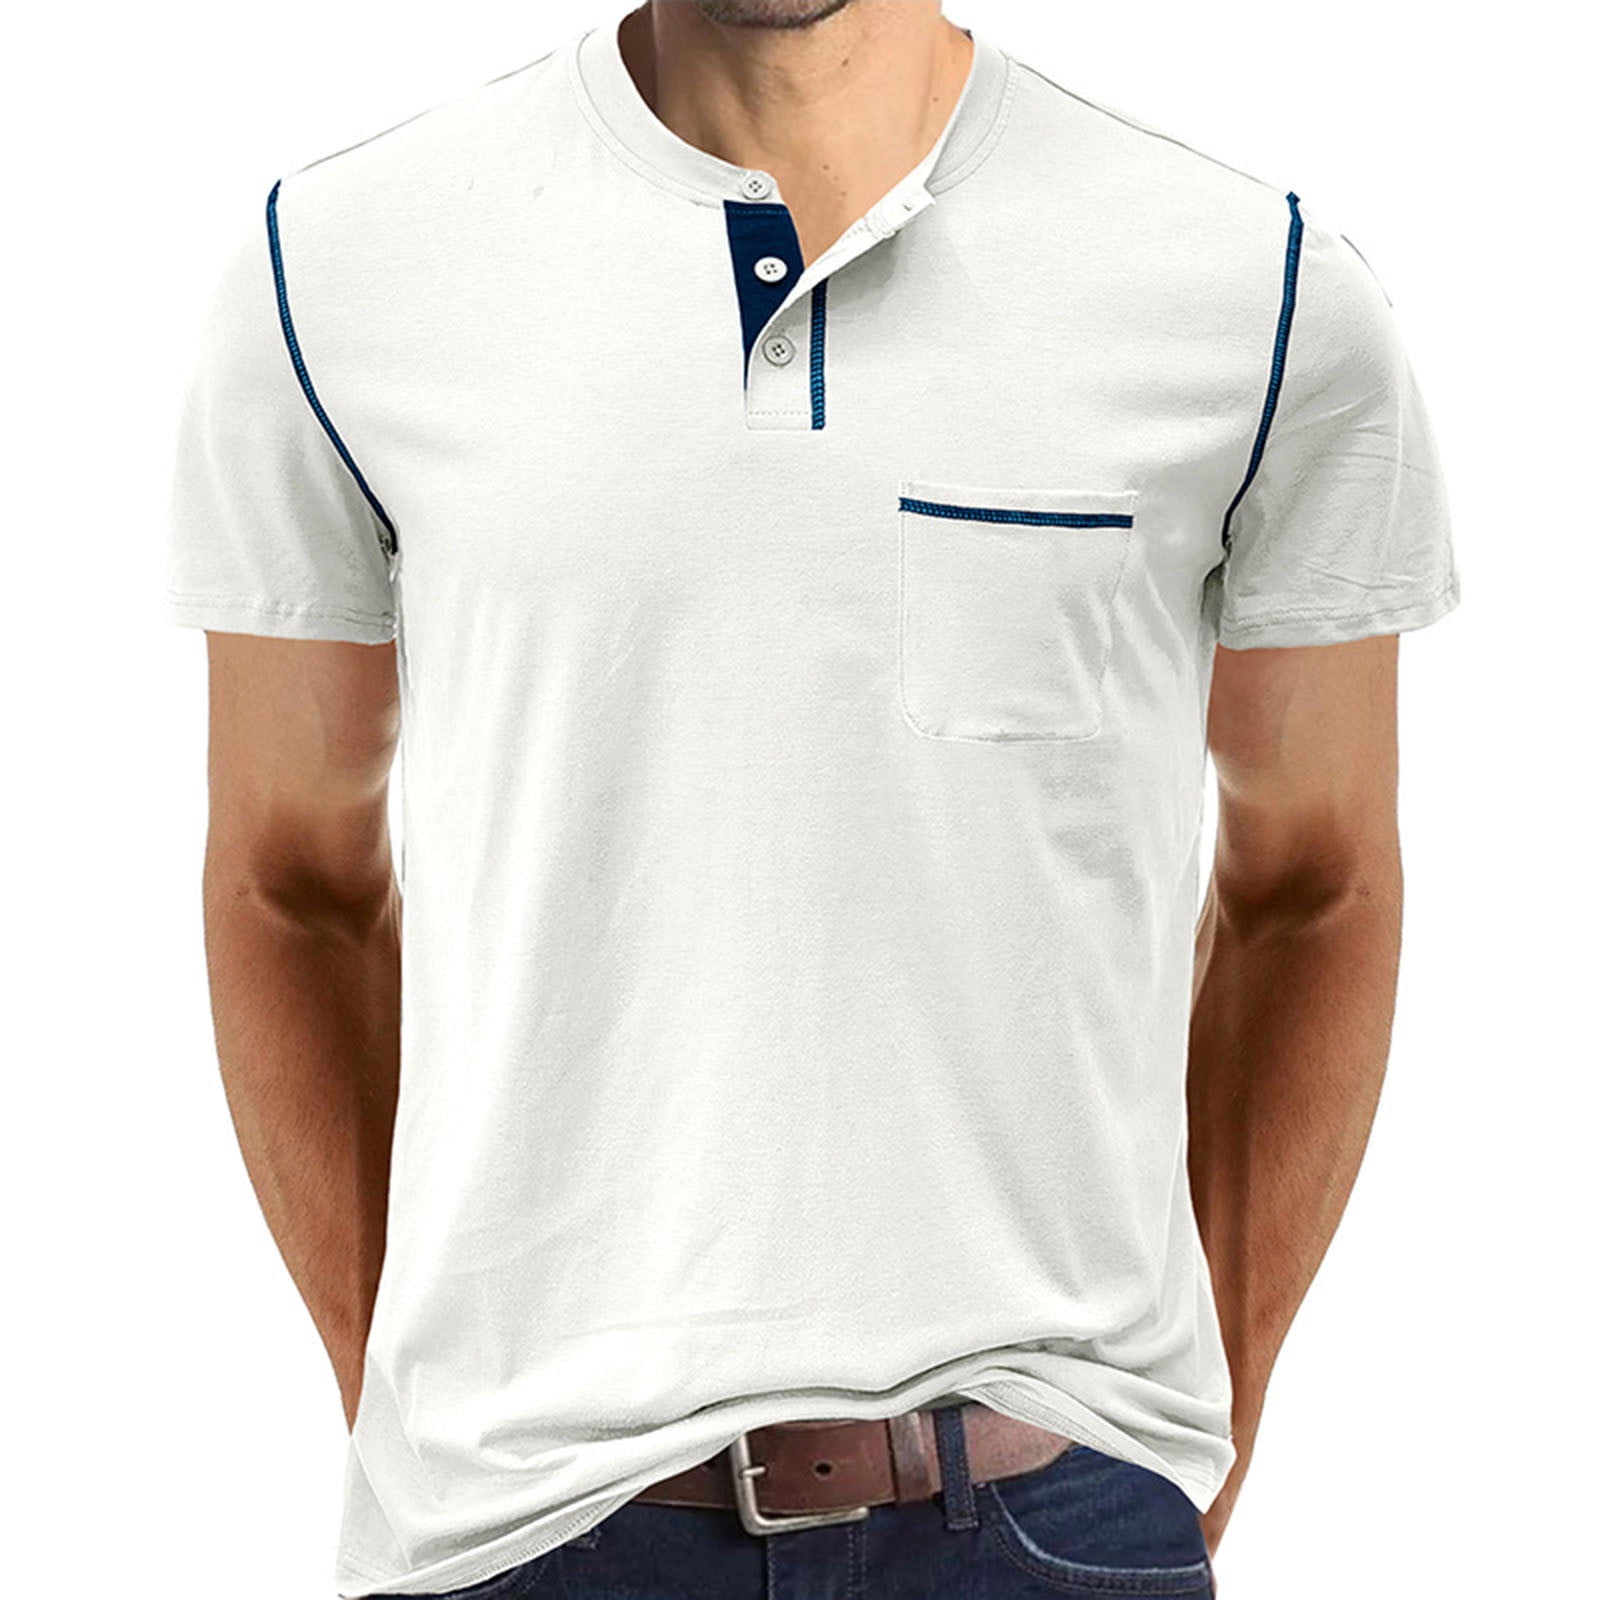 Viadha Men's Polo Shirts Performance Quick-Dry Water Resistant Casual ...